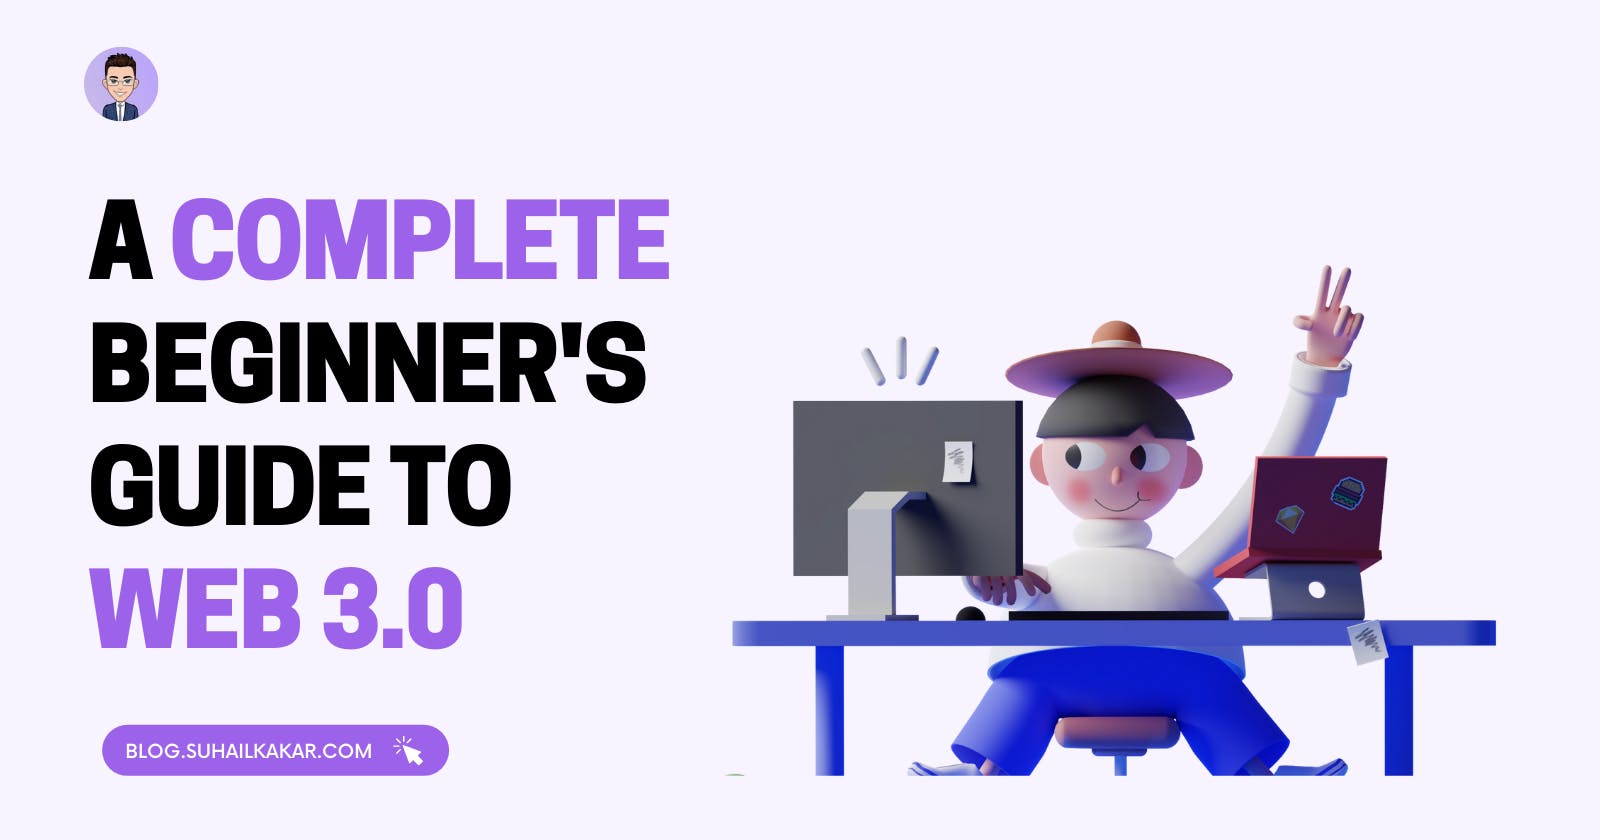 A Complete Beginner's Guide to Web 3.0